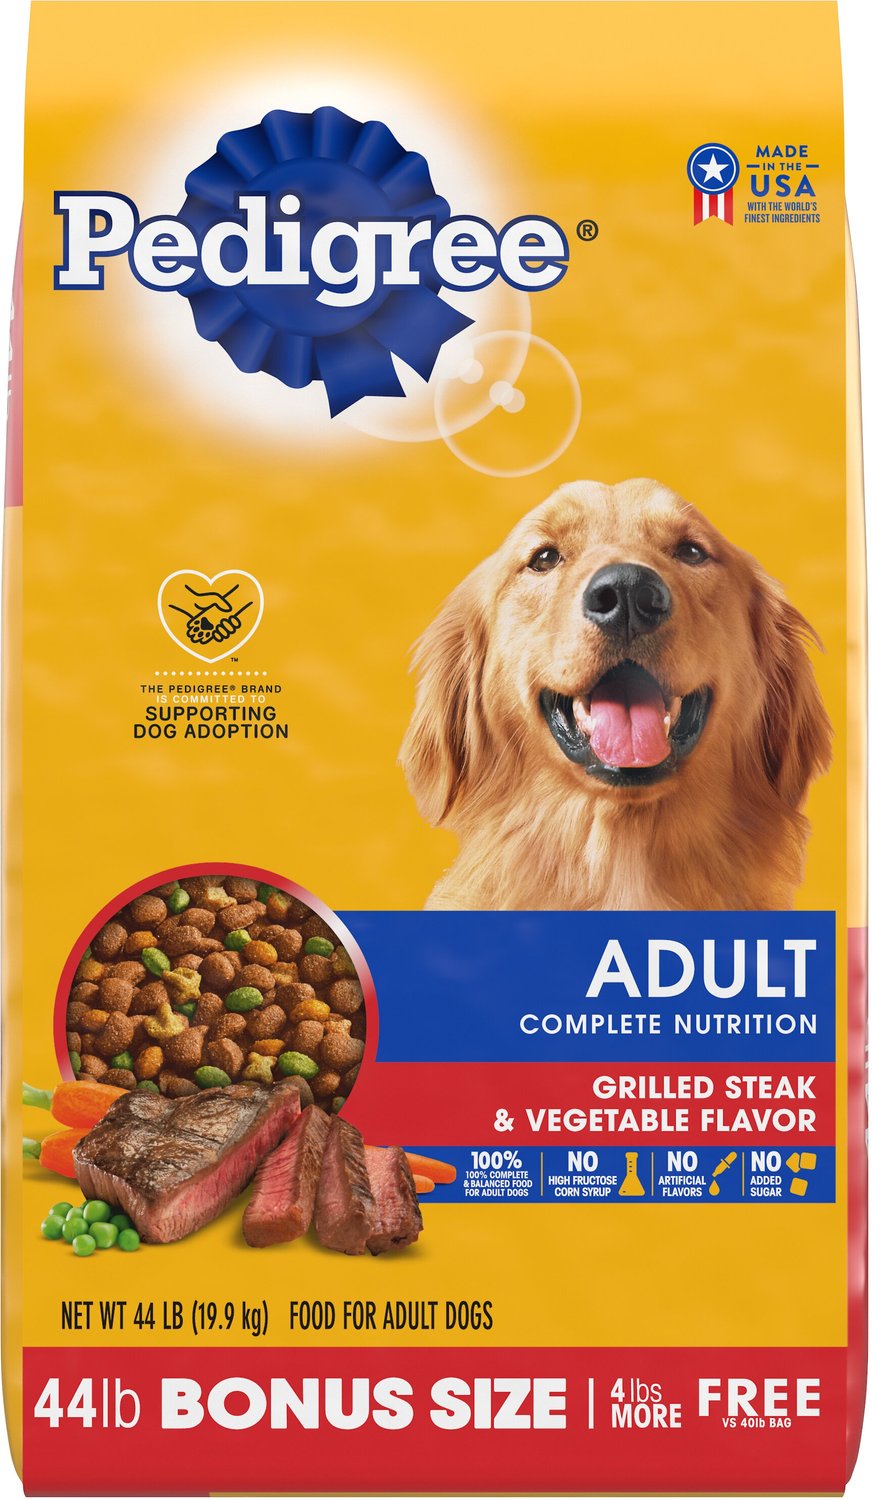 Pedigree Adult Complete Nutrition Alimento seco para perros